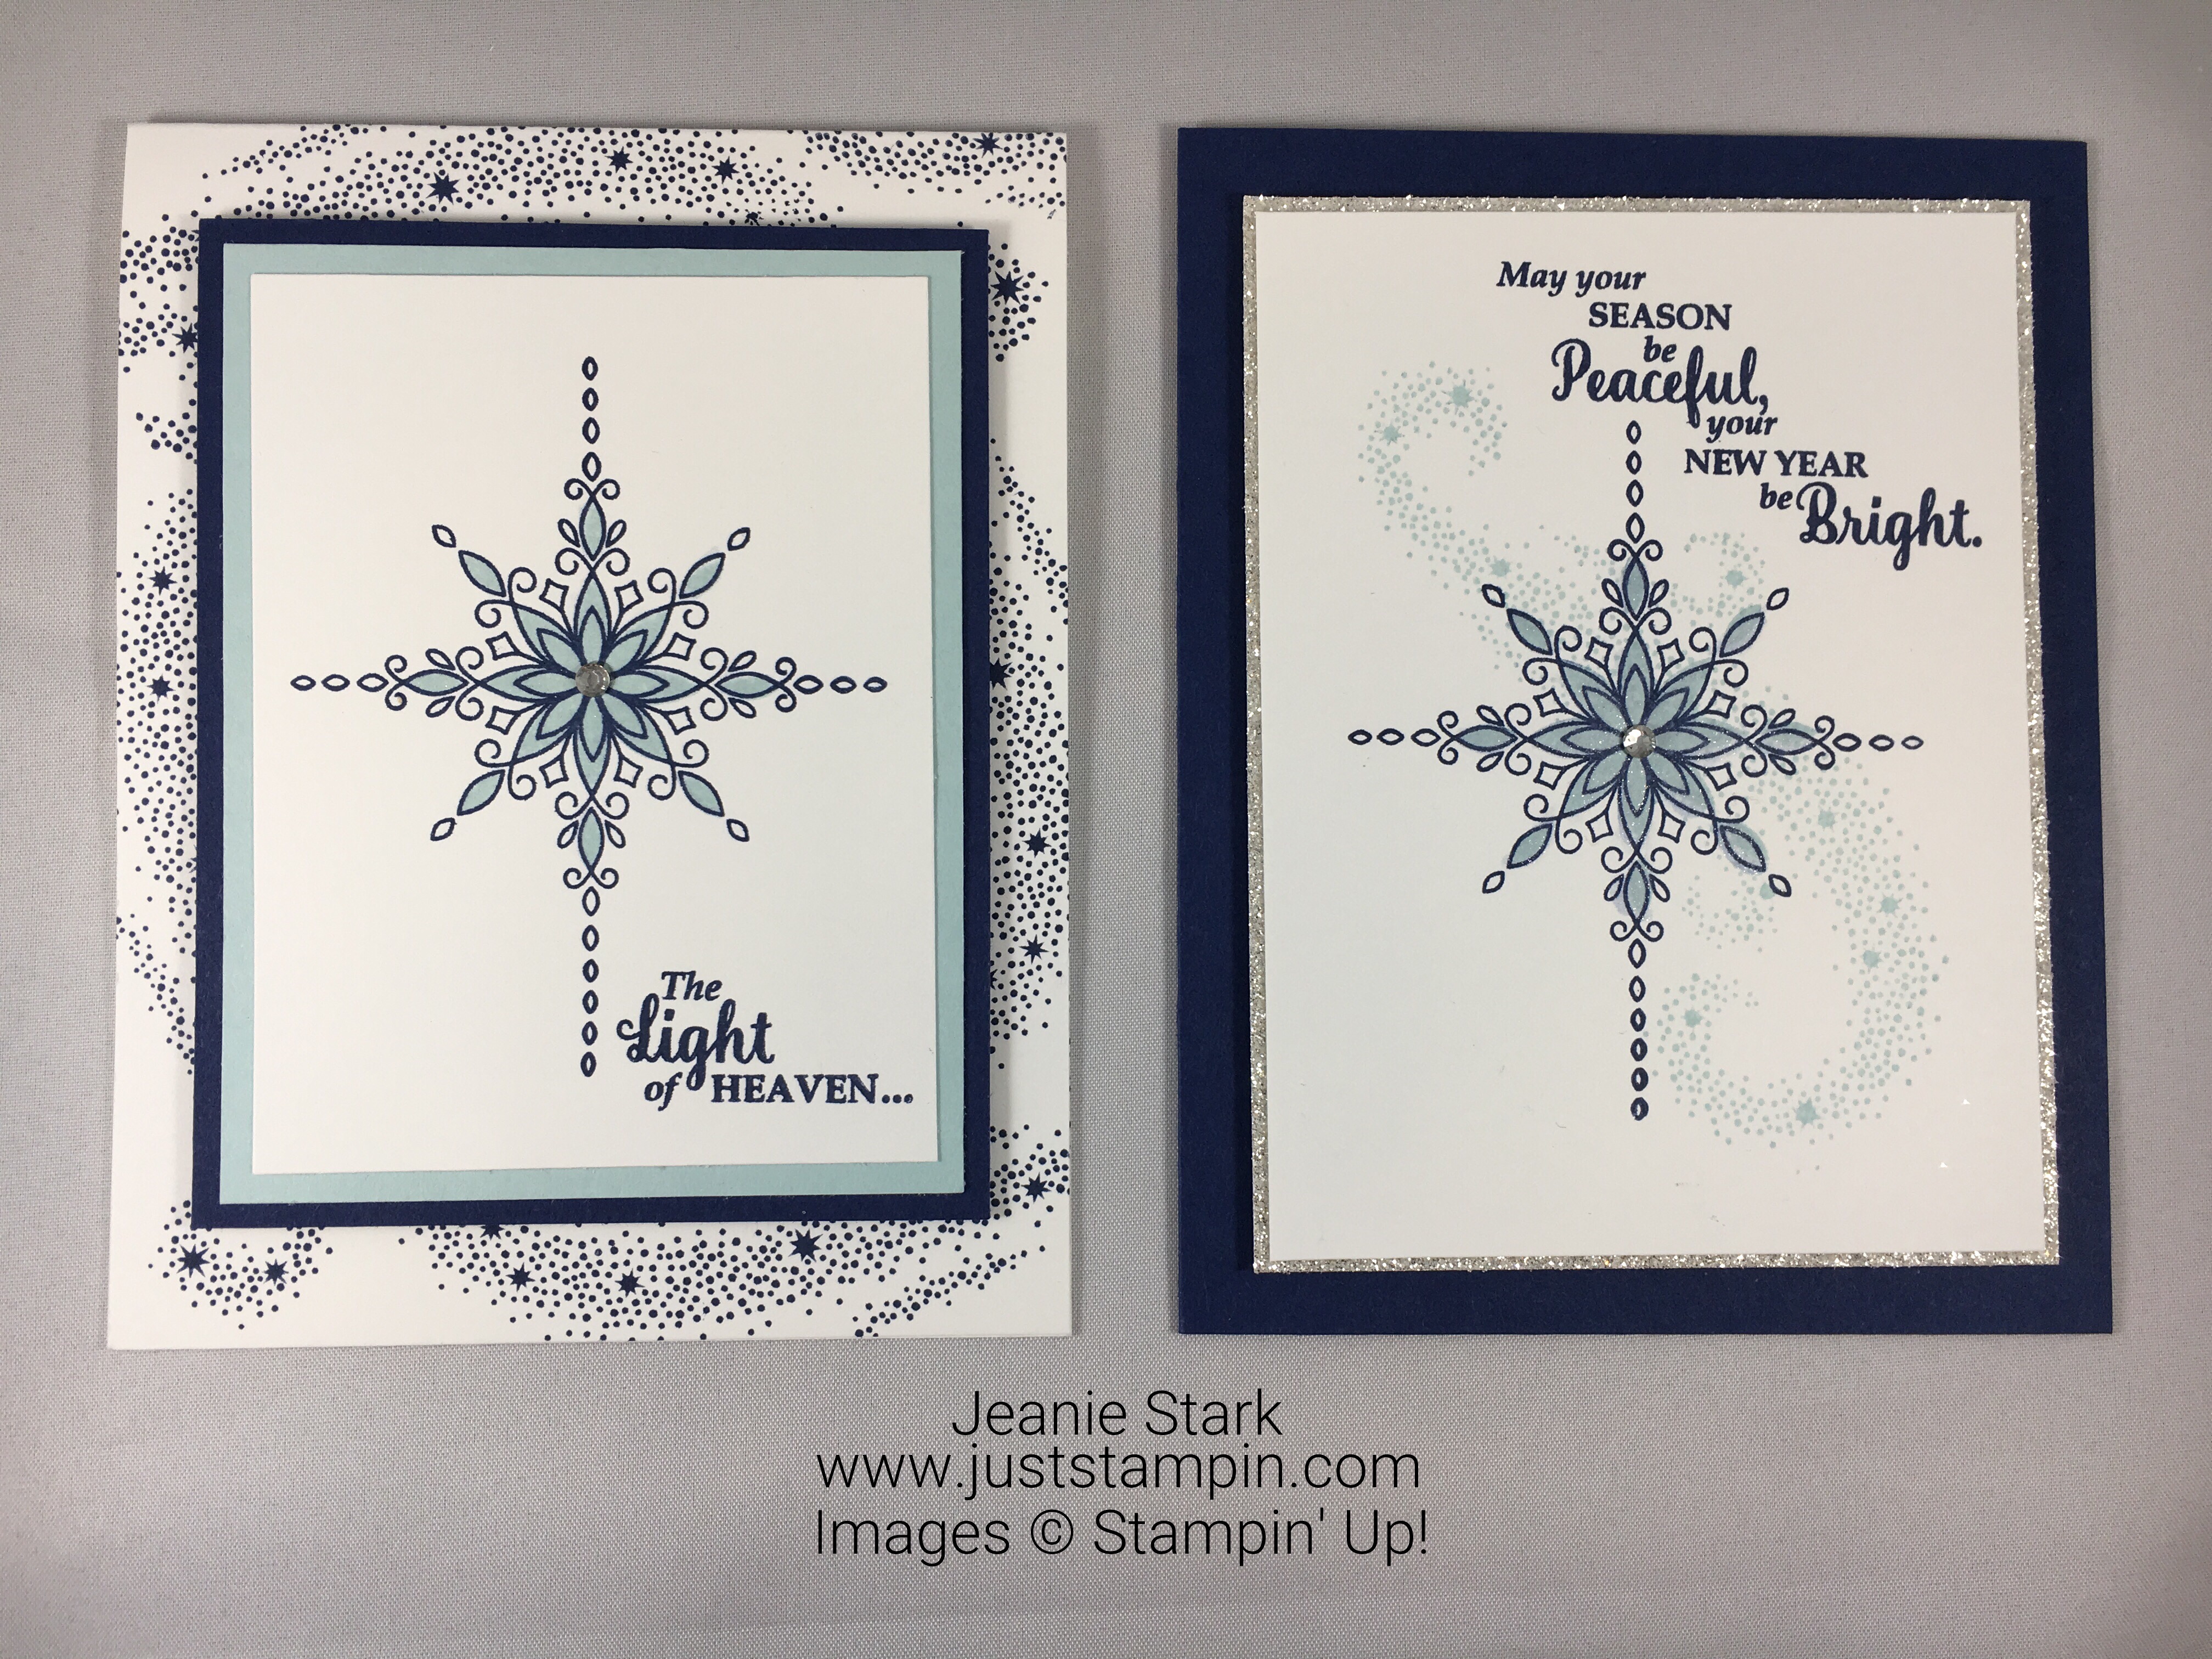 Stampin Up Star of Light Christmas card idea - Jeanie Stark StampinUp